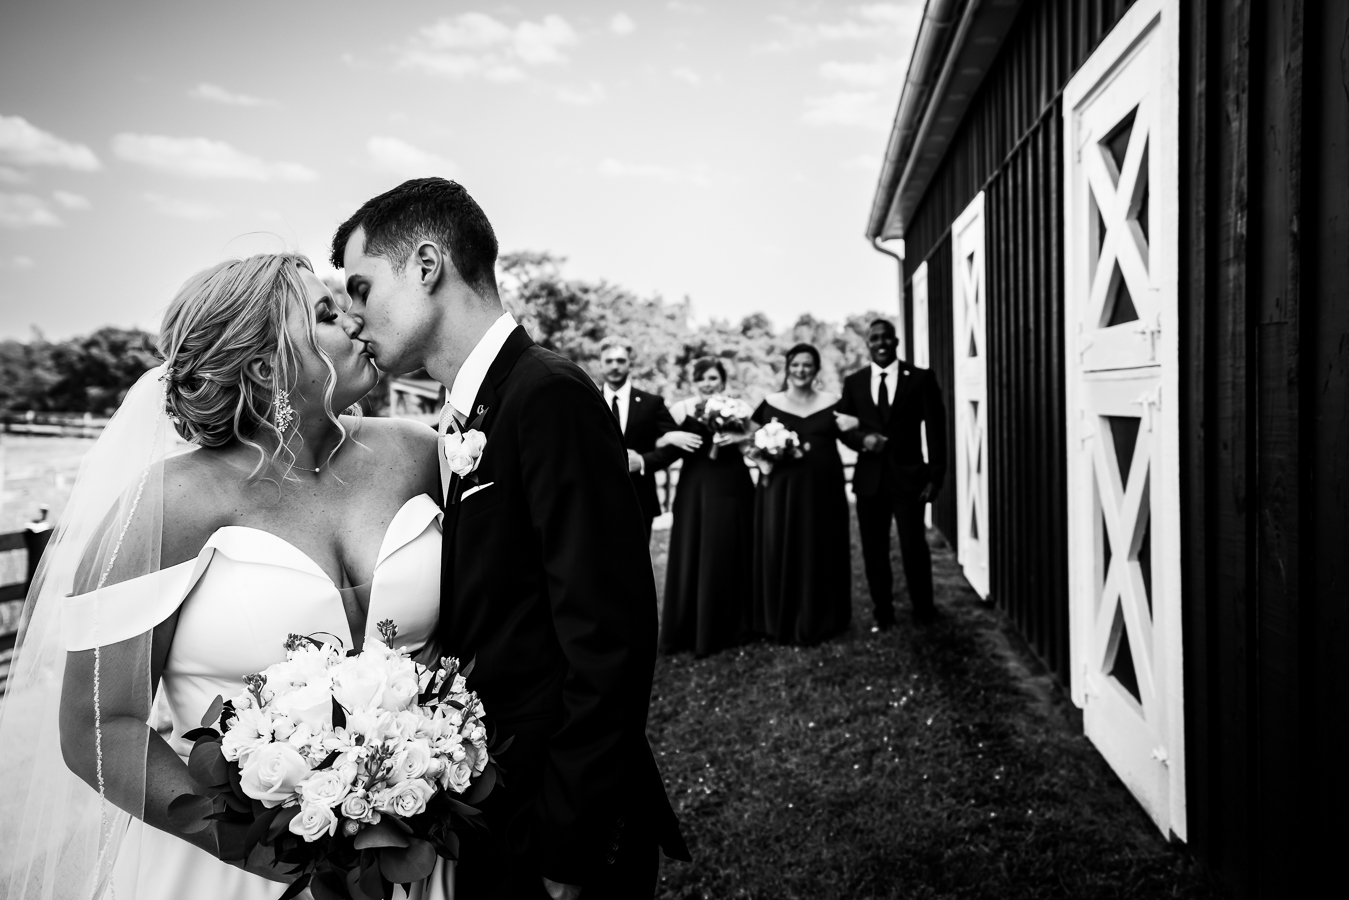 Middleburg Barn Wedding Photographer, lisa rhinehart, captures this black and white image of the couple kissing outside of the barn with their wedding party cheering and smiling behind them 